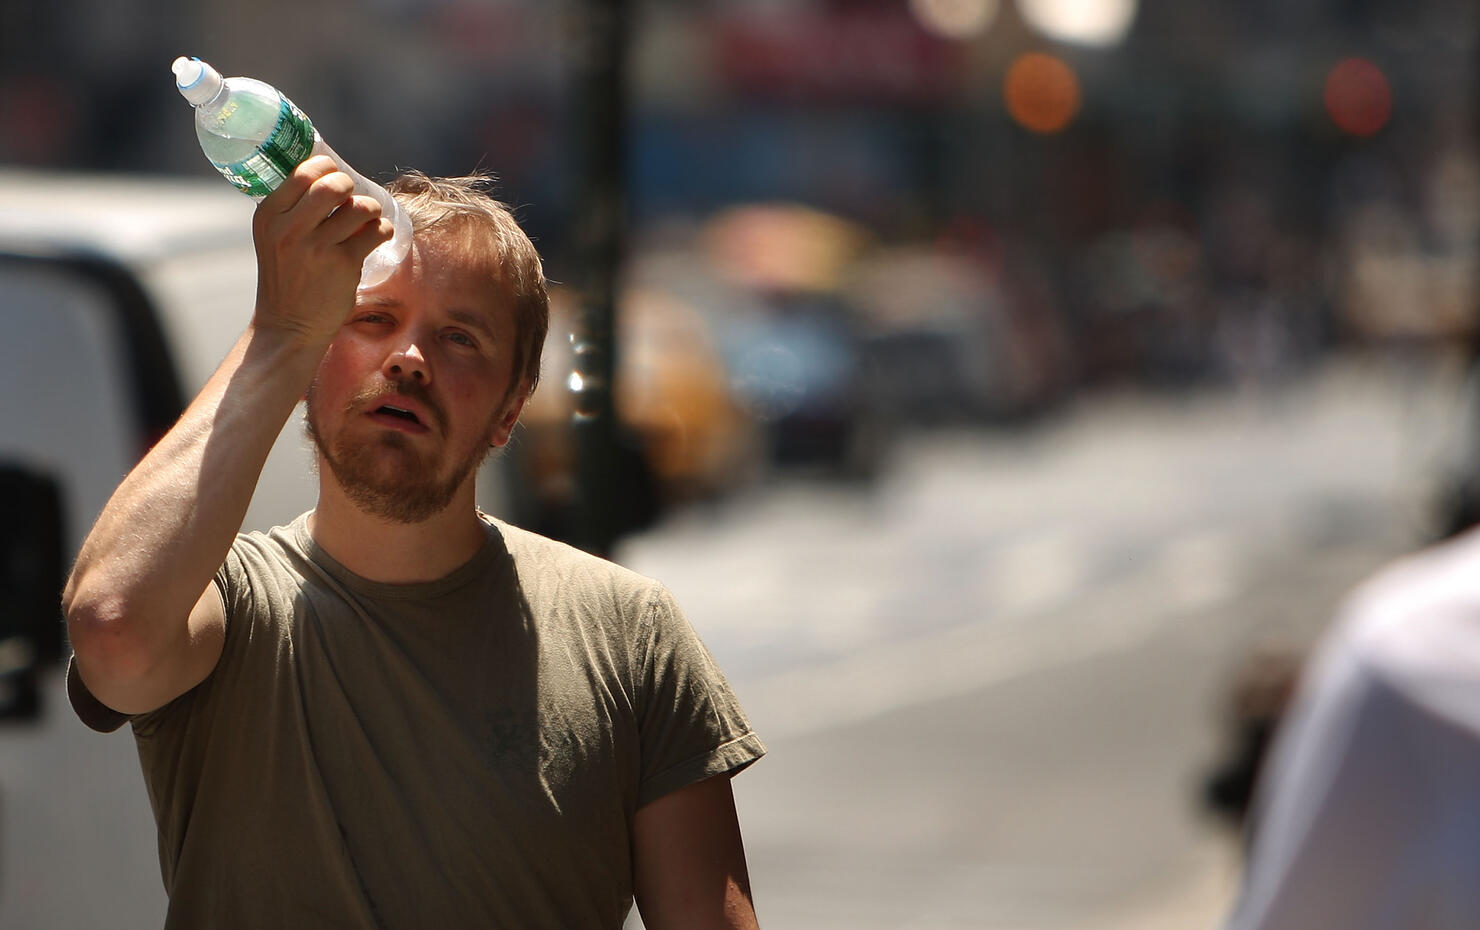 Man cools himself with a bottle of water.